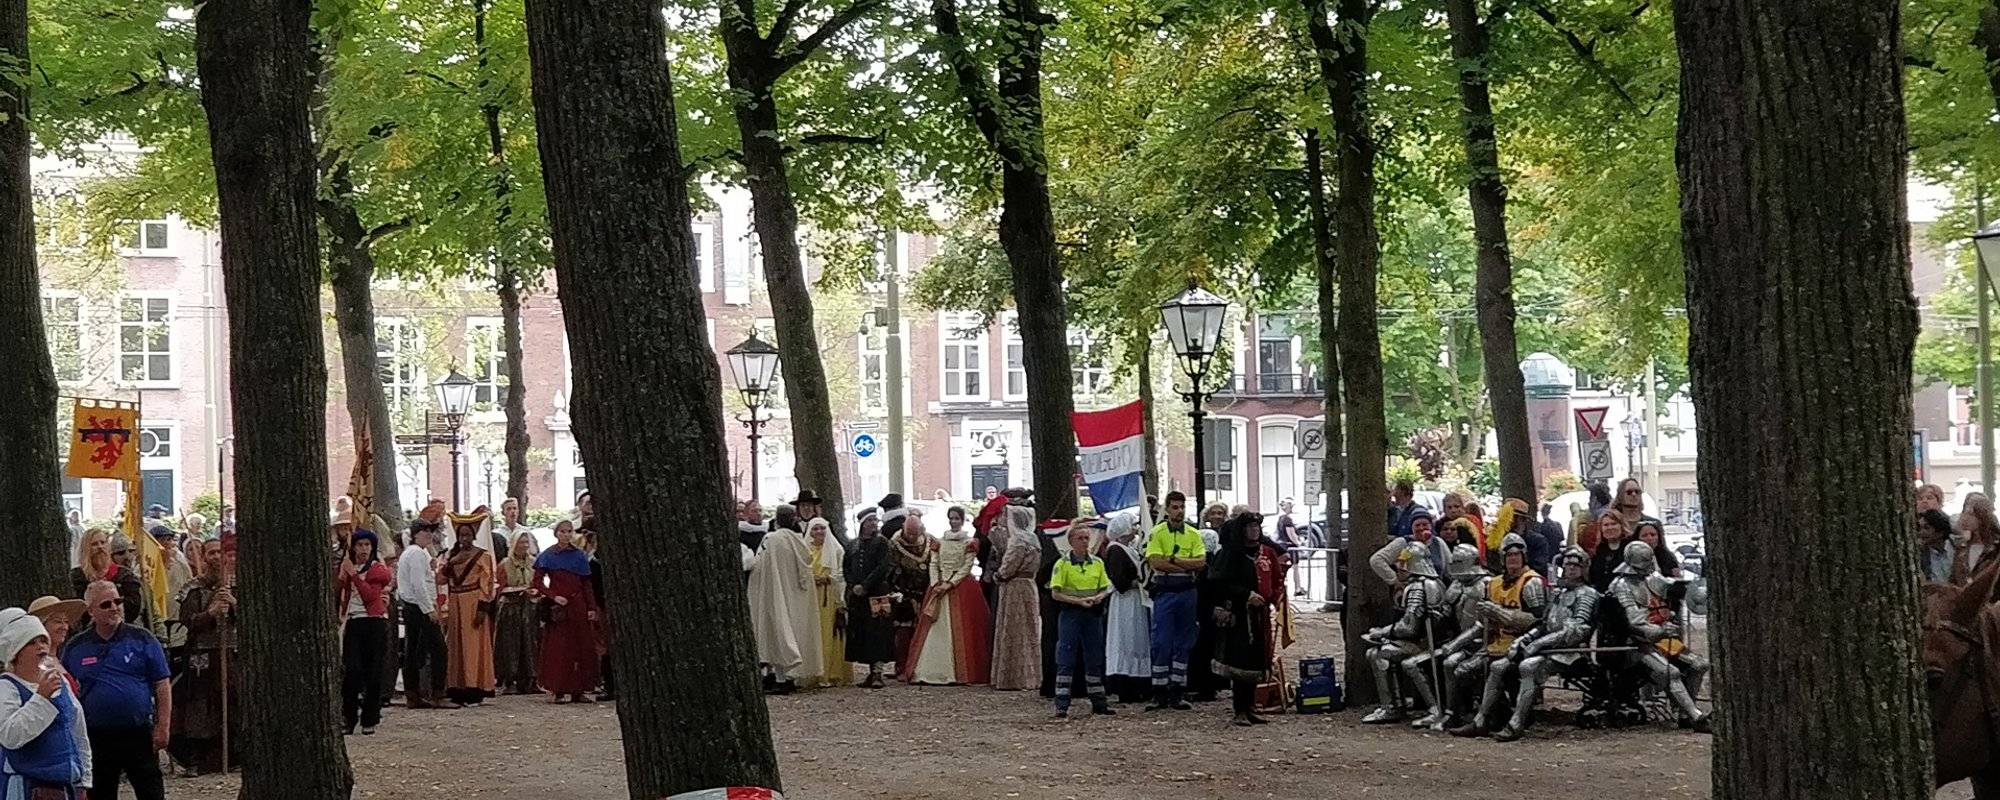 A Joust and Historical Days in Den Haag (Netherlands)